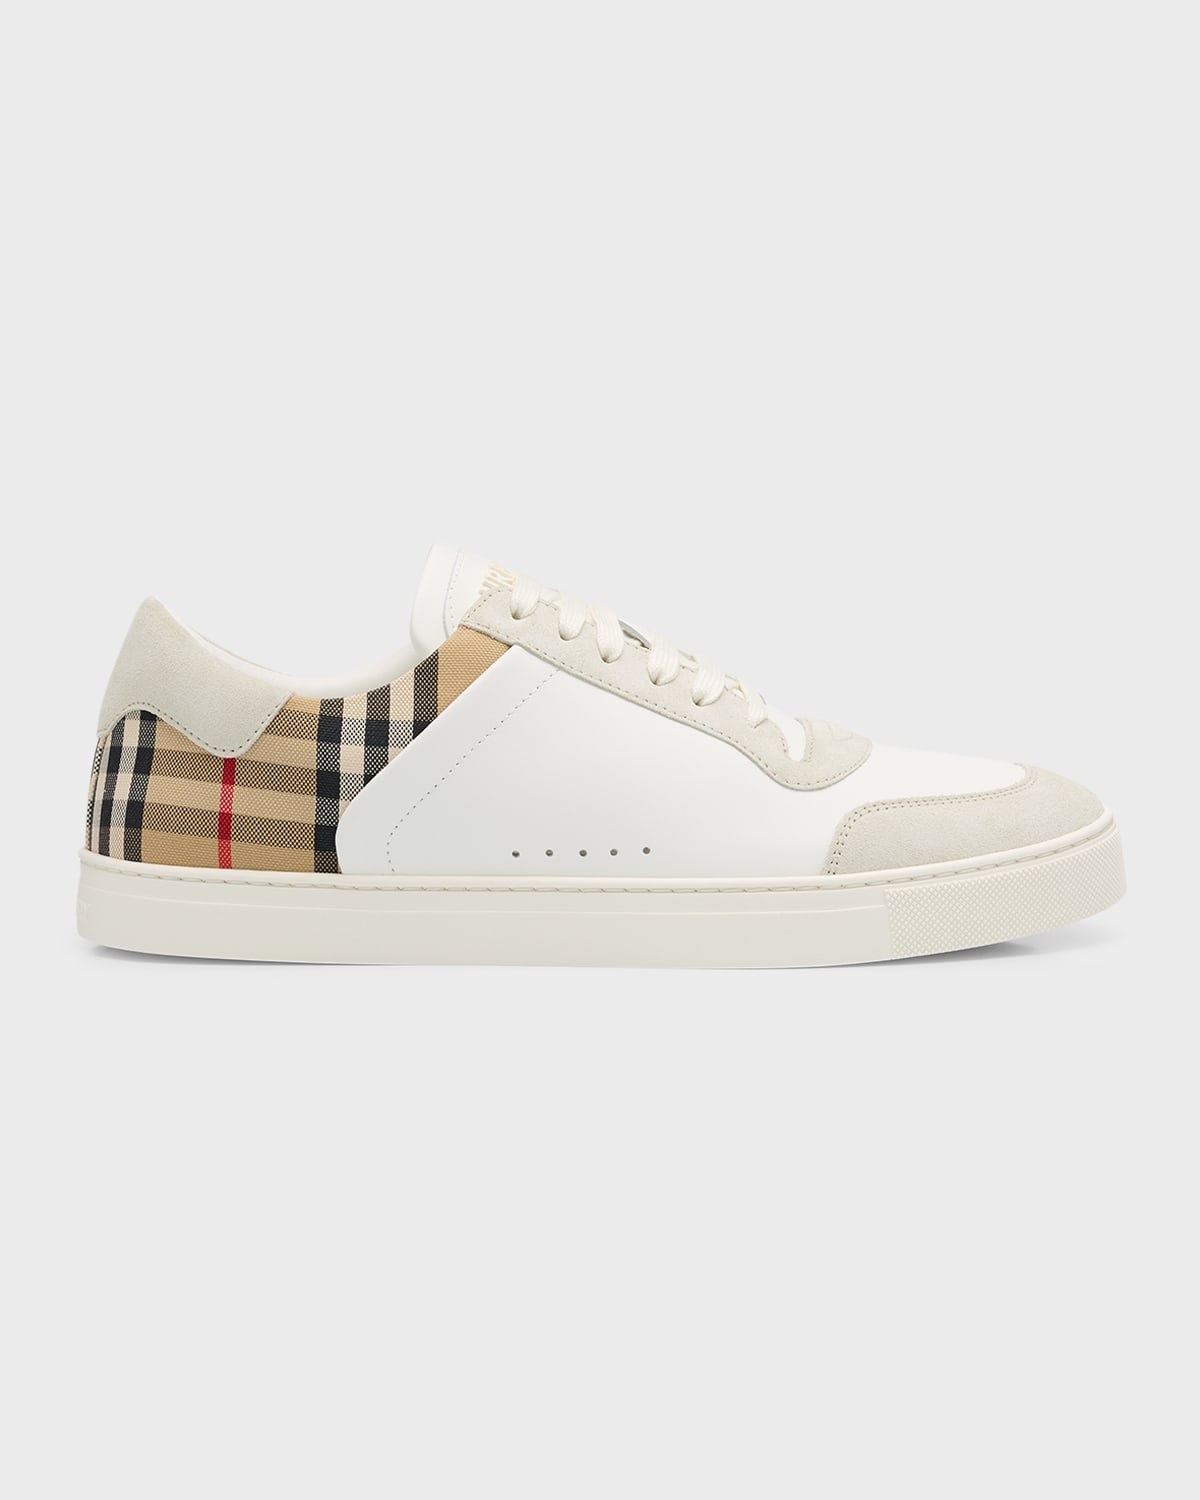 Men's Leather-Suede Check Sneakers